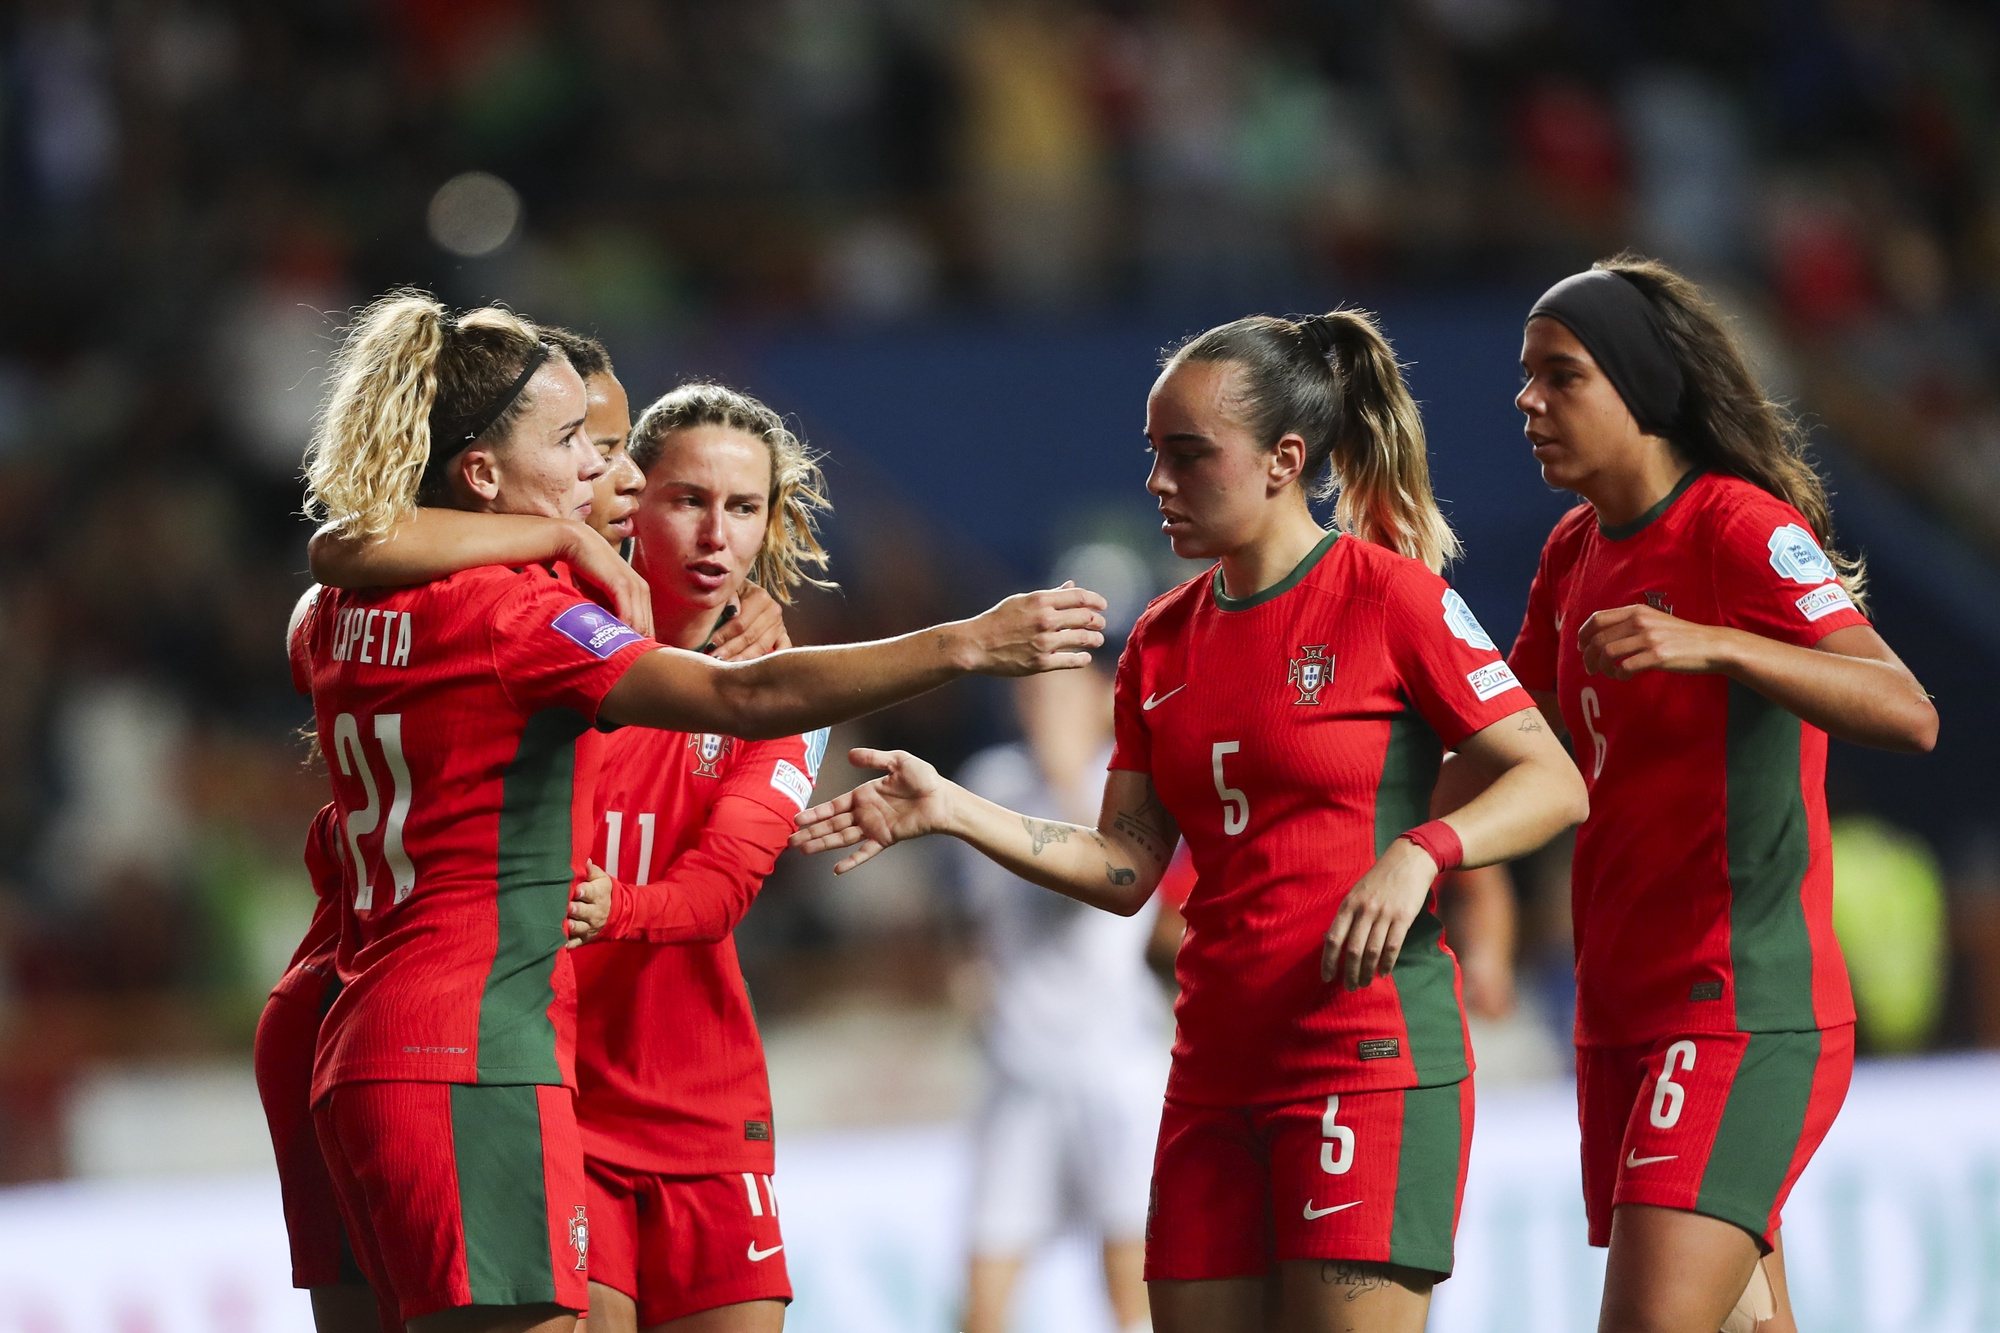 Portugal players celebrate after scoring a goal against Bosnia and Herzegovina during their European Women’s Championship soccer match held at Magalhaes Pessoa Stadium, in Leiria, Portugal, 5 April 2024. PAULO CUNHA/LUSA